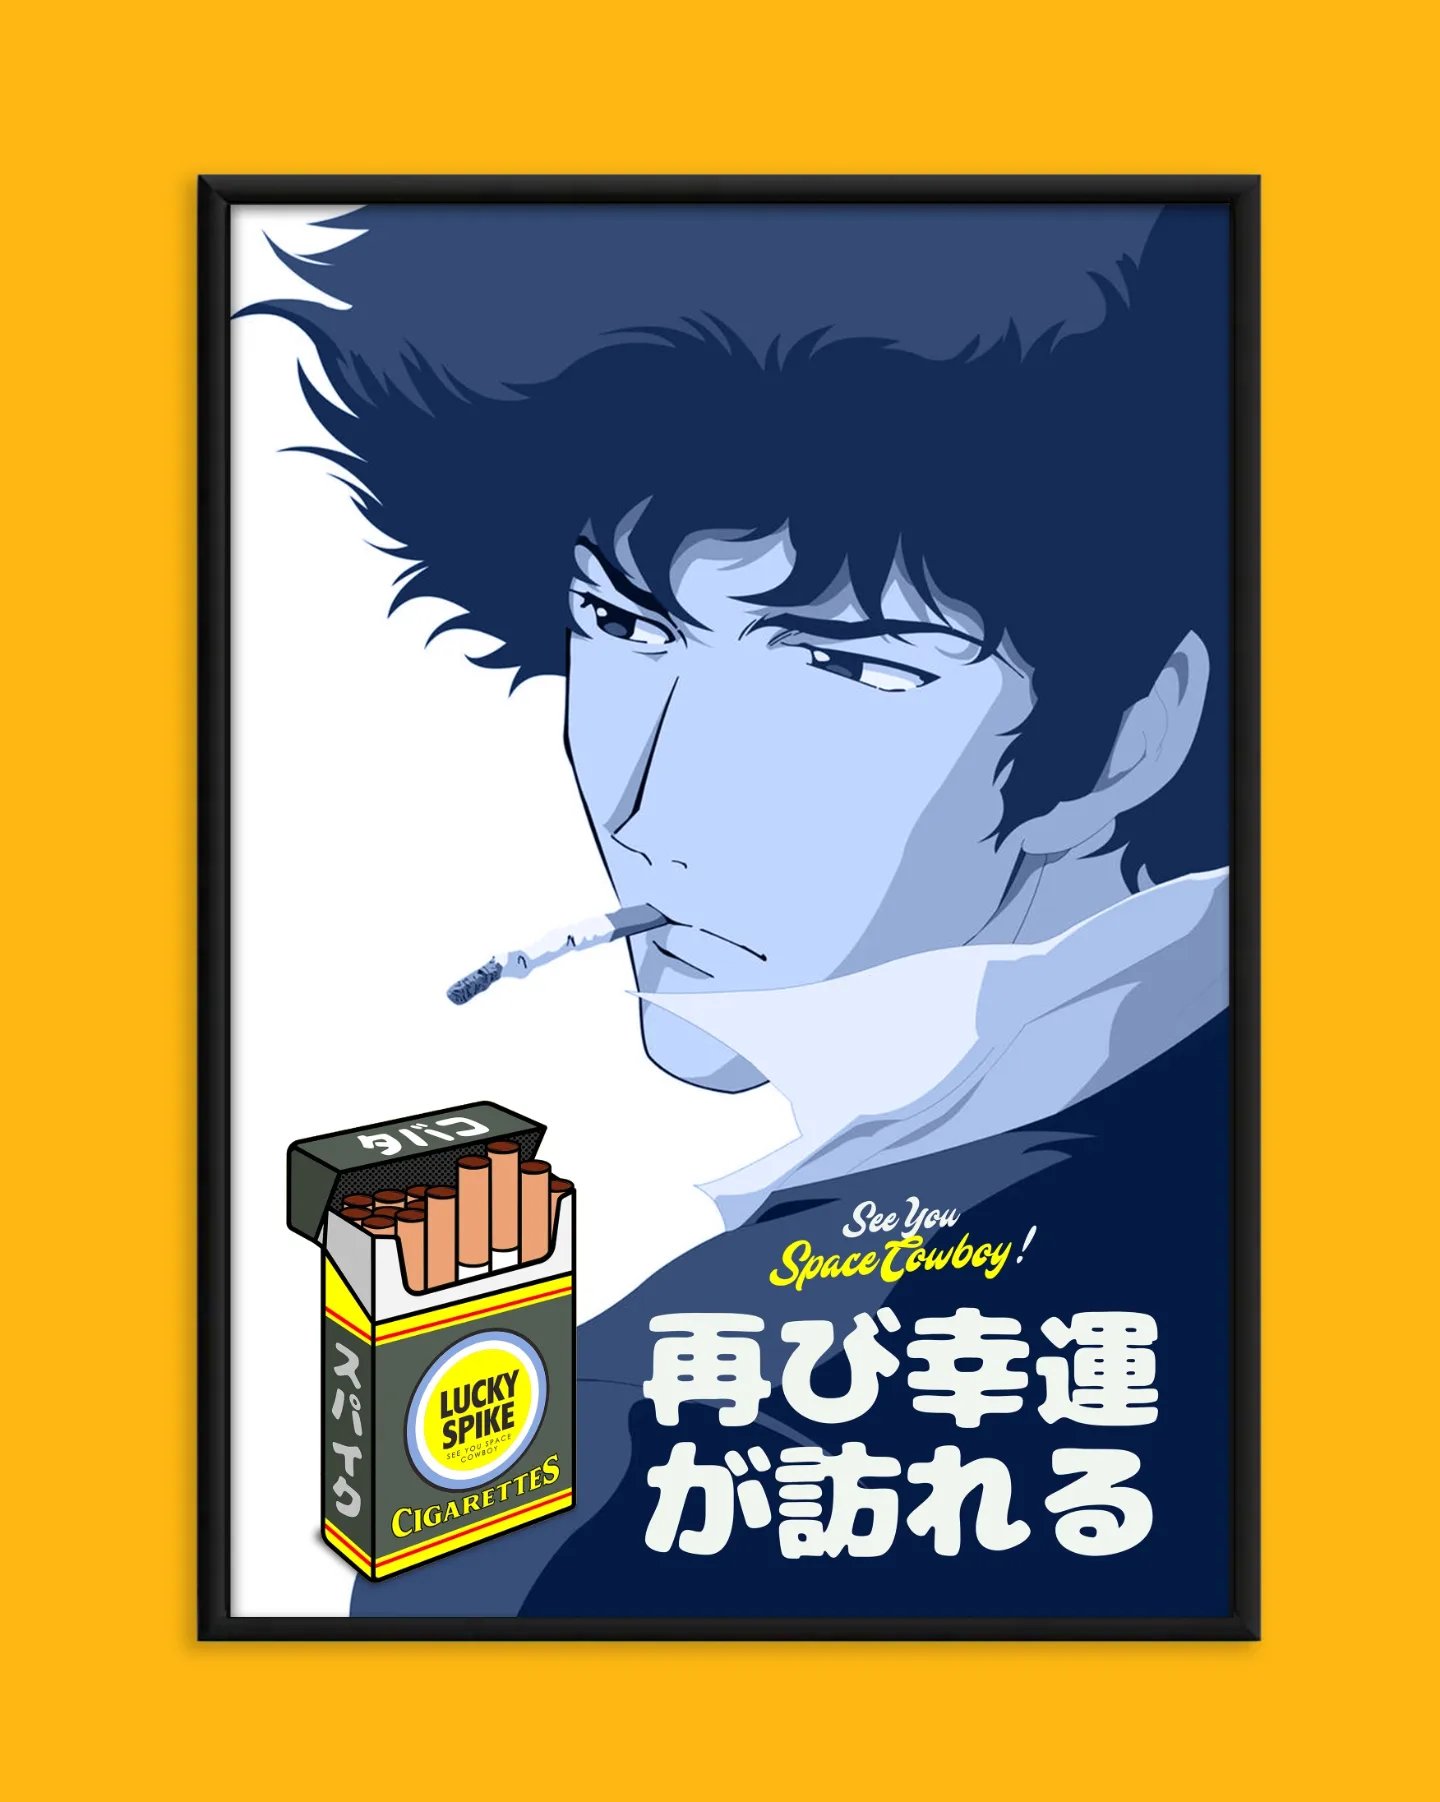 Lucky Spike Cigarettes Ad Variant